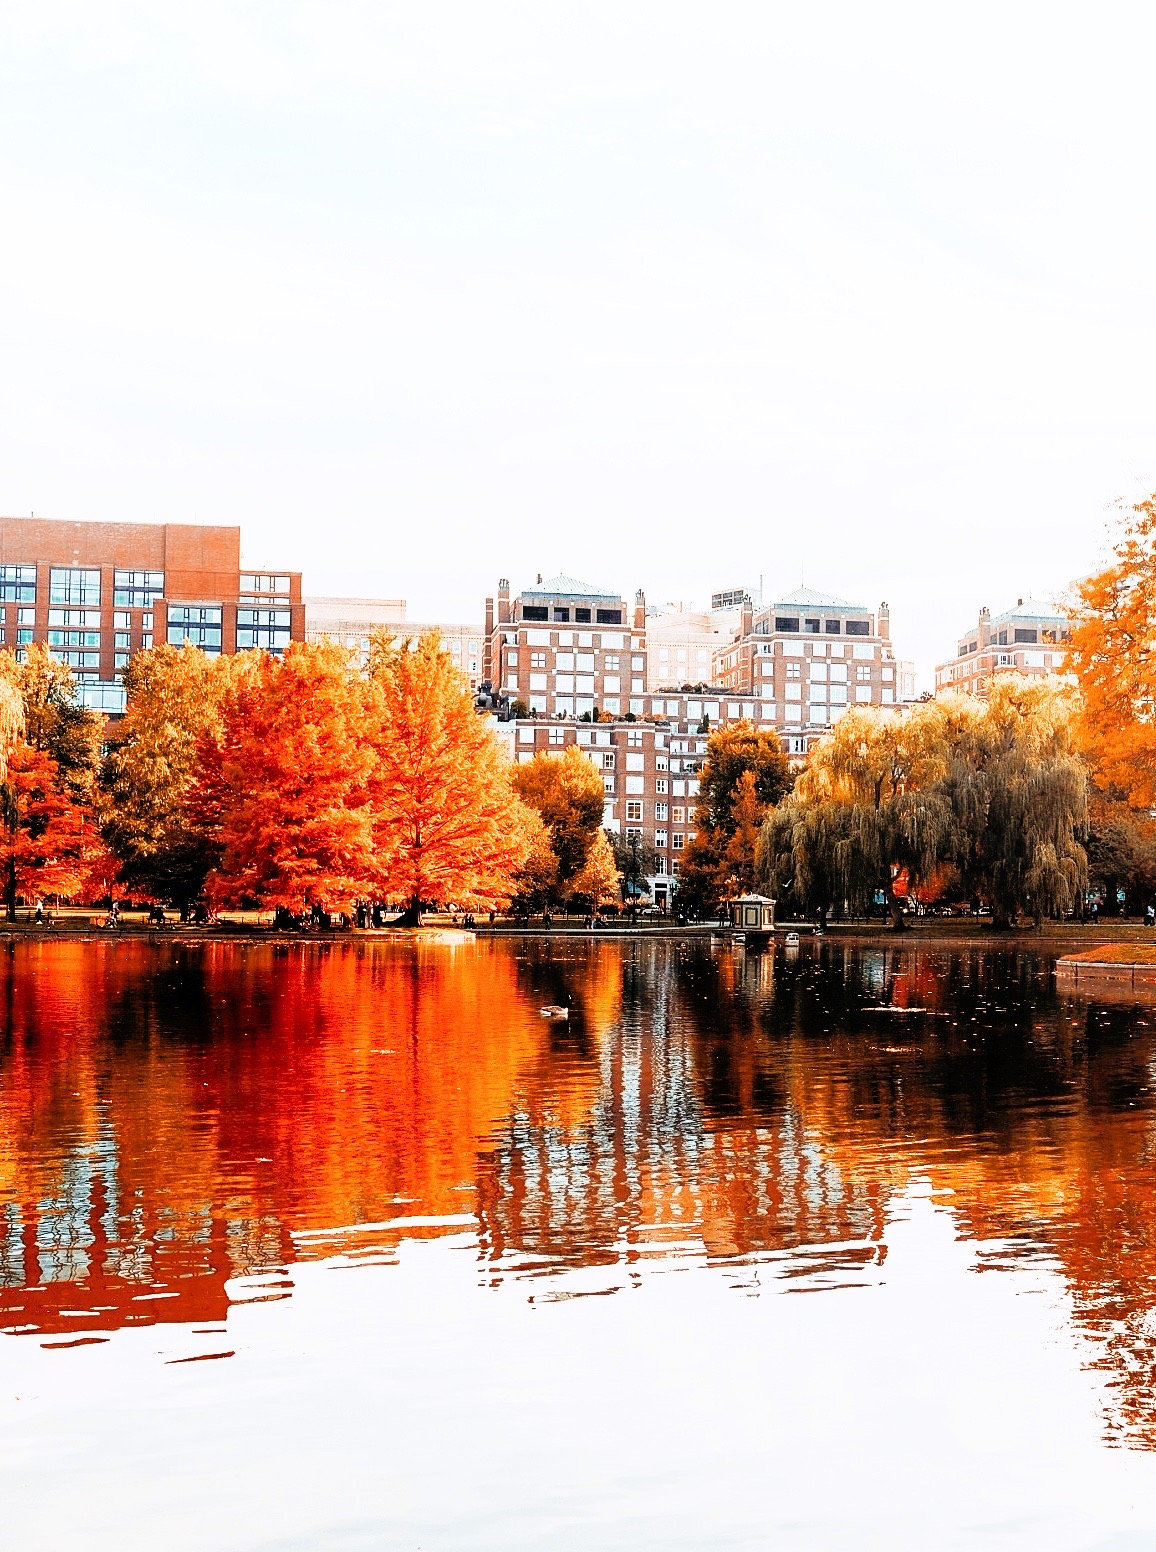 Lifestyle Blogger Chocolate & Lace shares her trip to Boston, MA in the fall